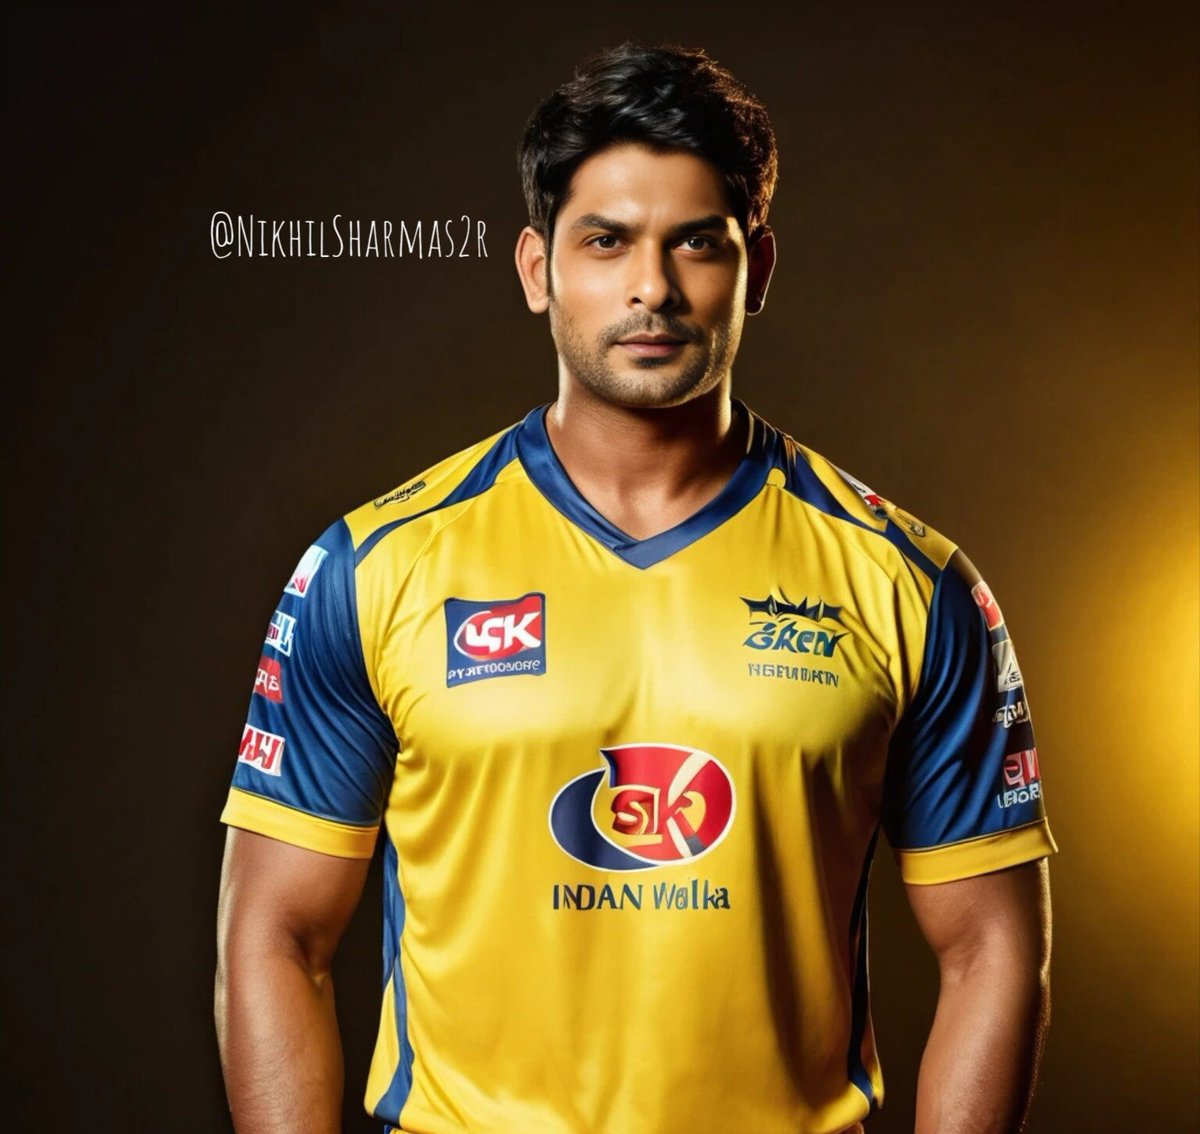 Swinging for the fences and aiming for the stars. 🏏✨ #CSK #SidharthShukla #SidHearts #WhistlePodu #MSDhoni𓃵 #SidharthShukIaLivesOn